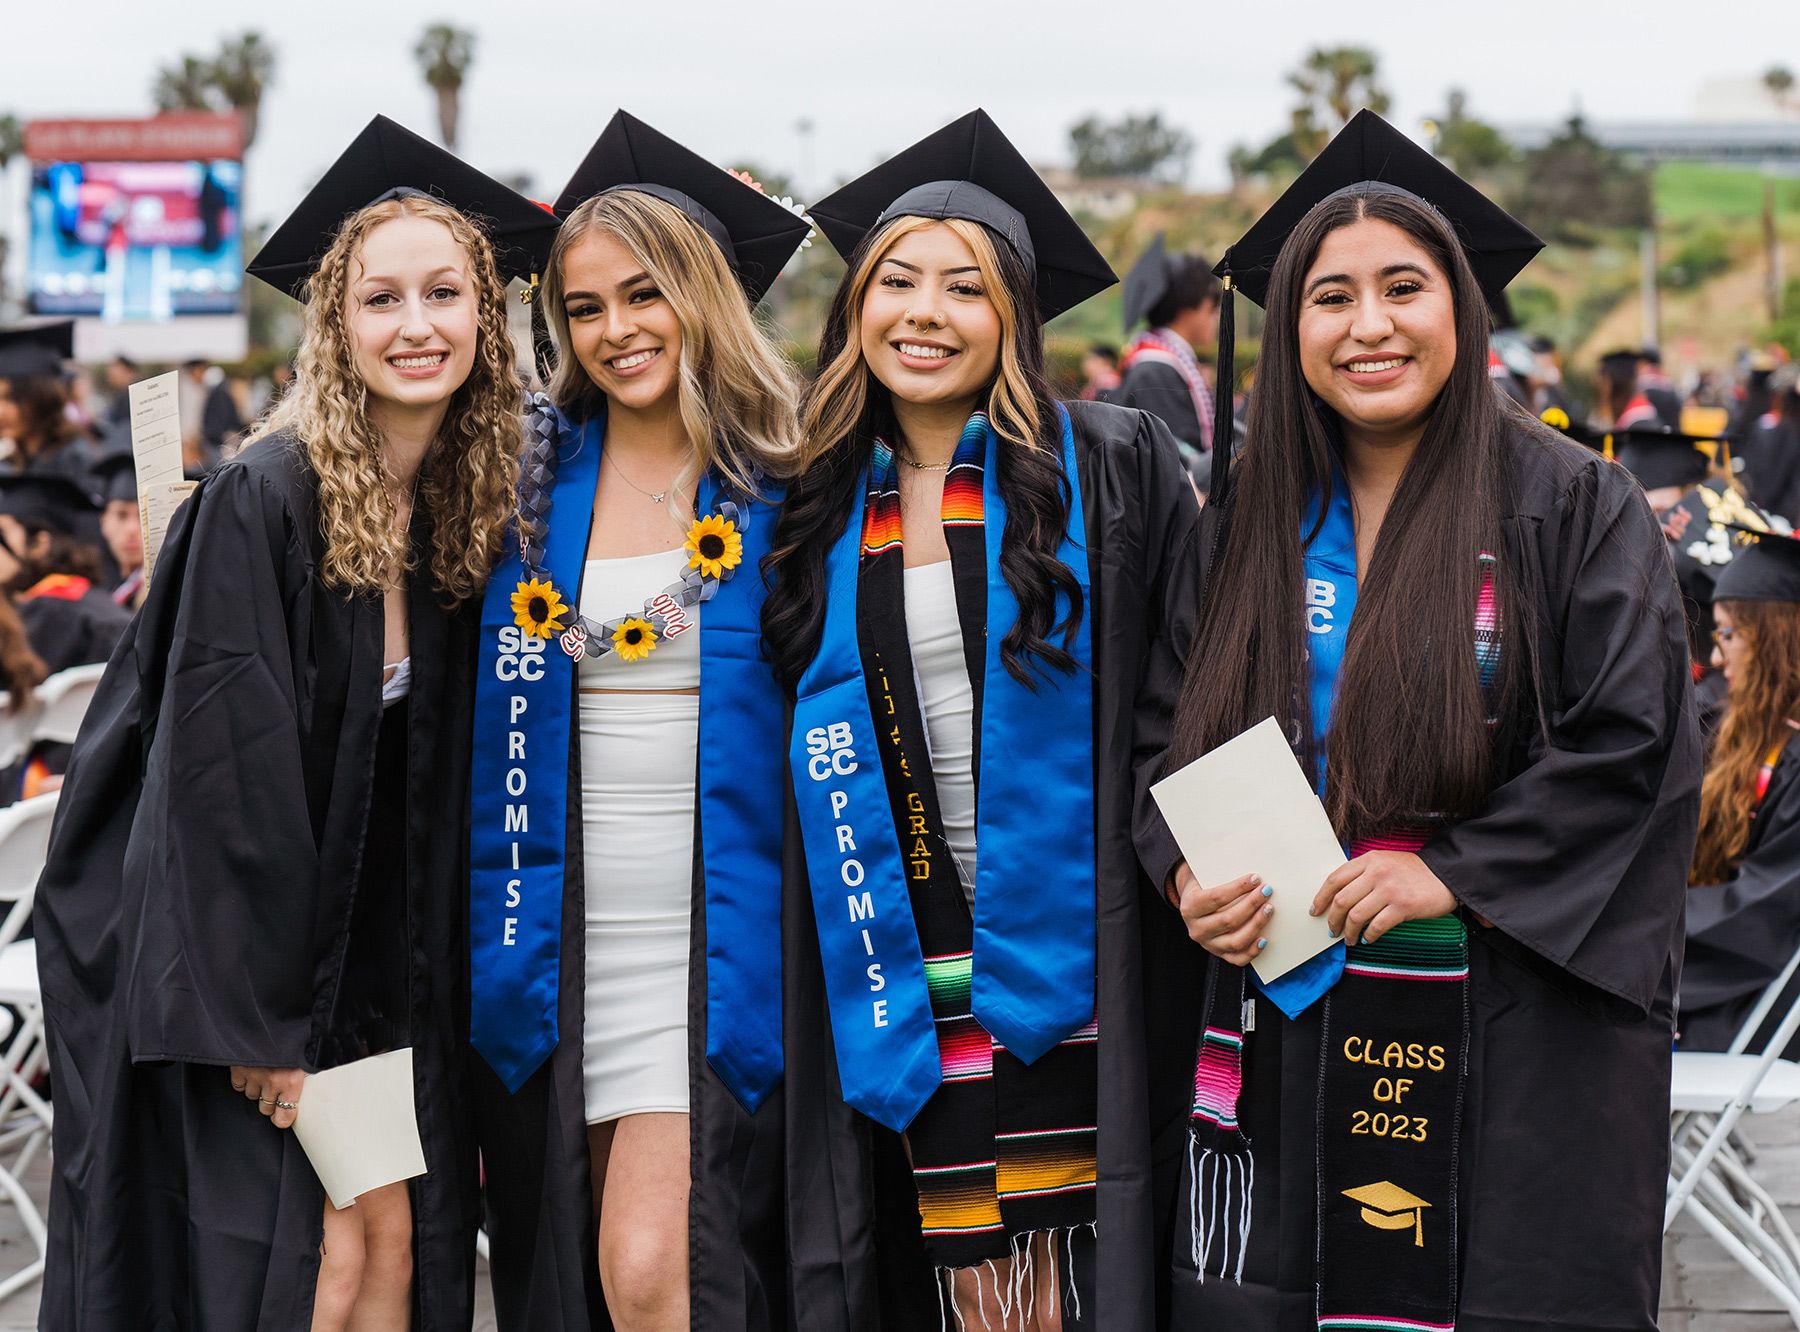 Four female college graduates pose for a photo in their caps and gowns.